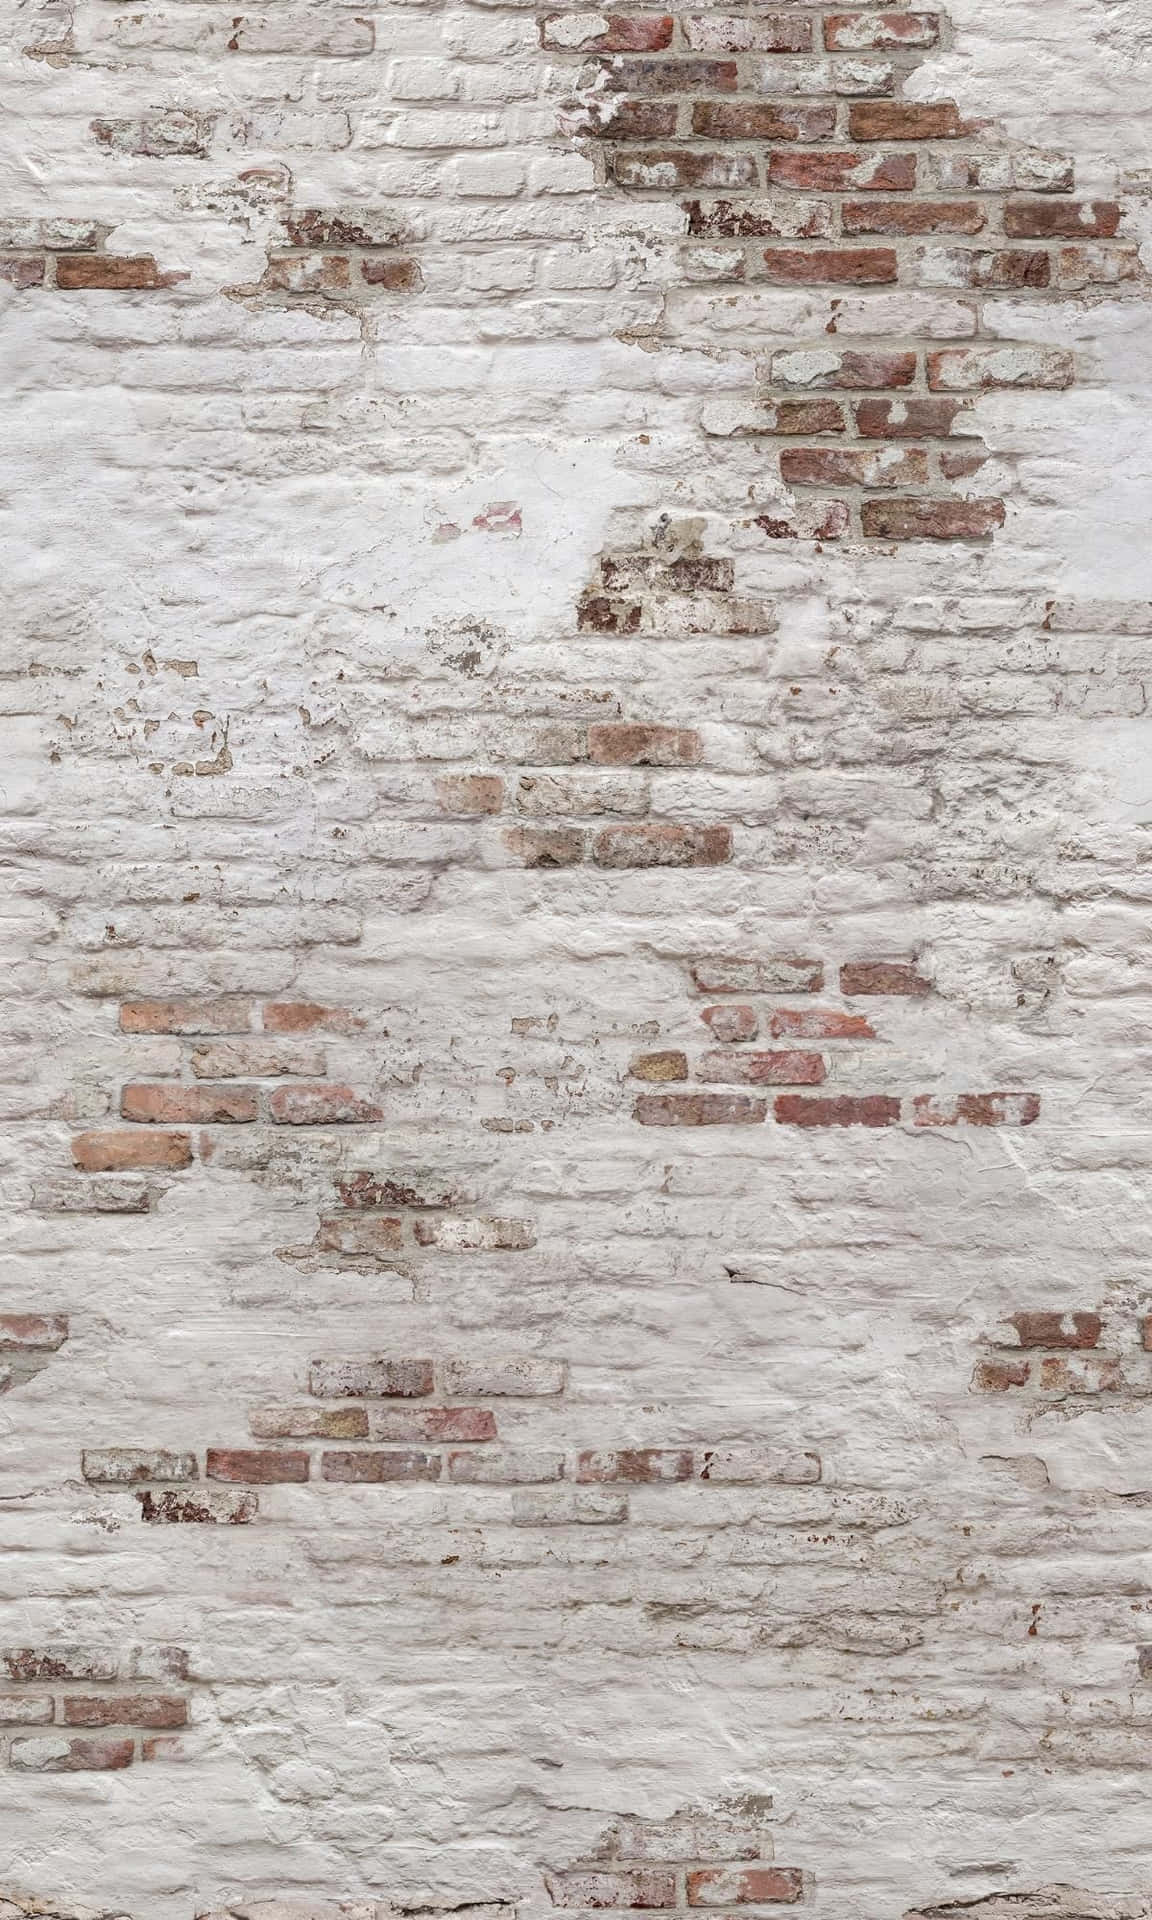 A White Brick Wall With White Paint On It